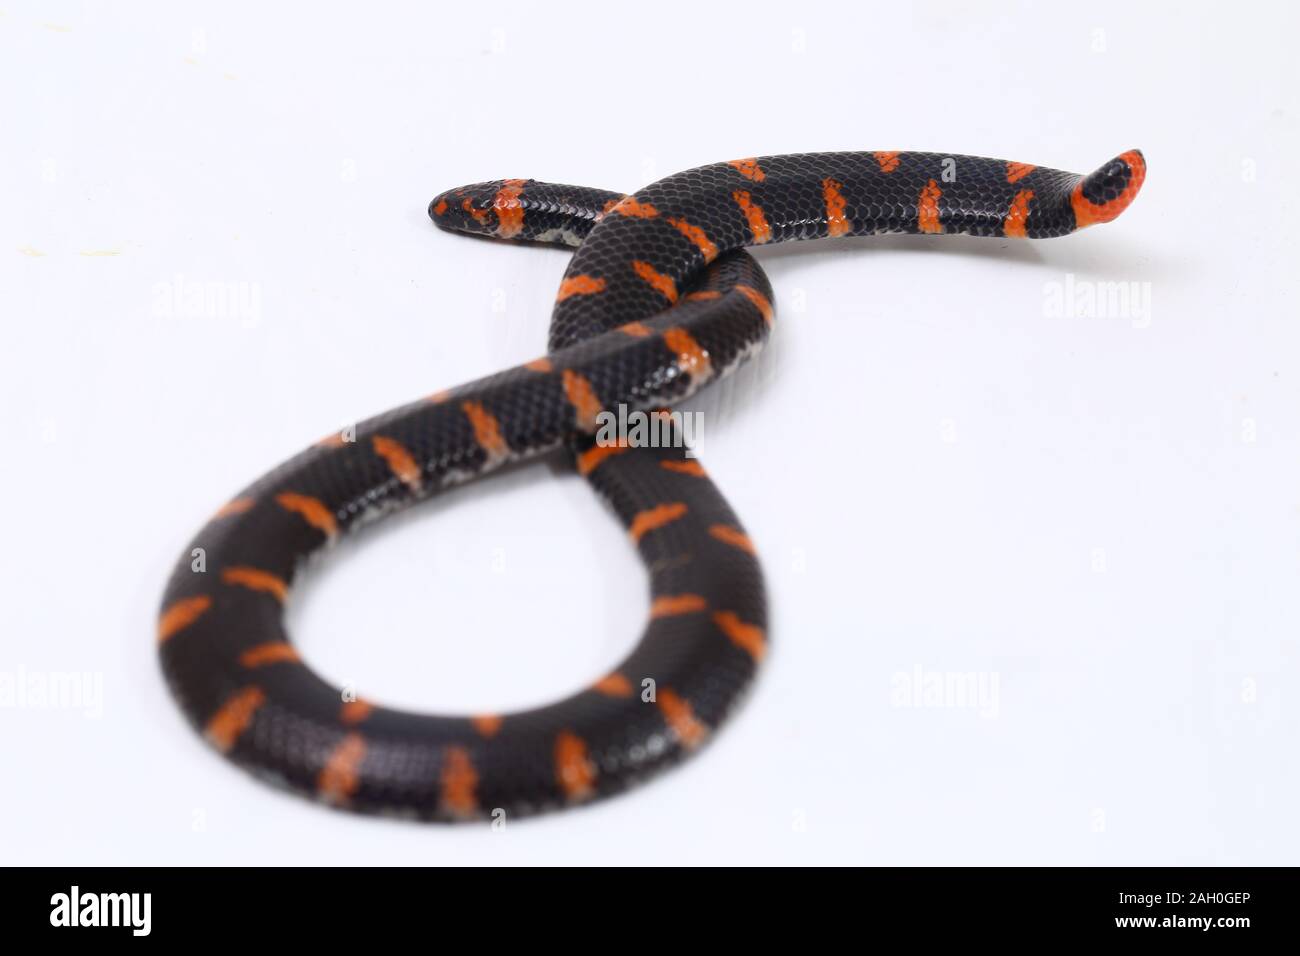 Stock photo of Blanford's Pipe Snake (Cylindrophis lineatus) raising its  tail which is…. Available for sale on